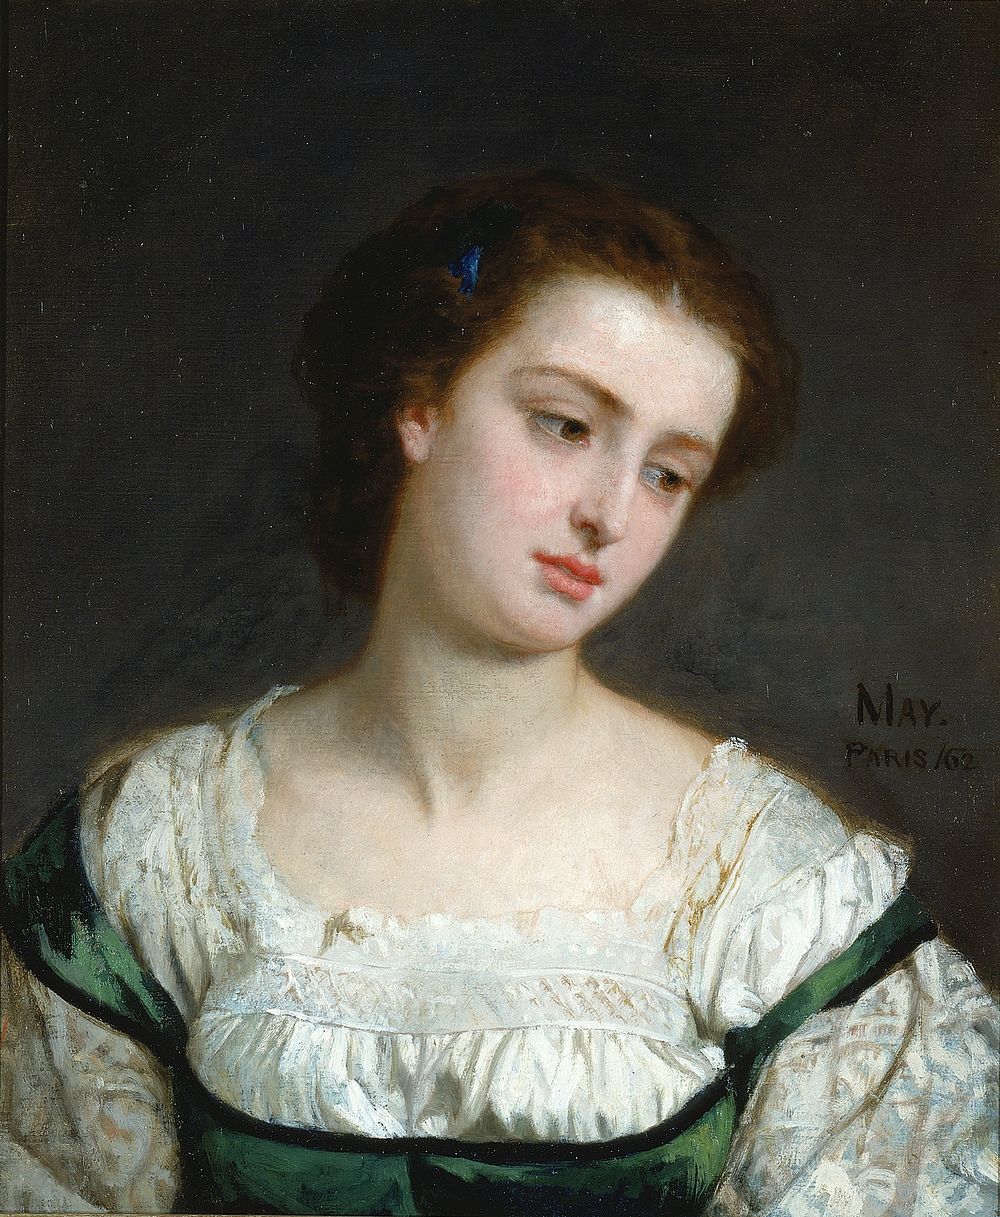 Portrait of a Young Woman by Edward Harrison May